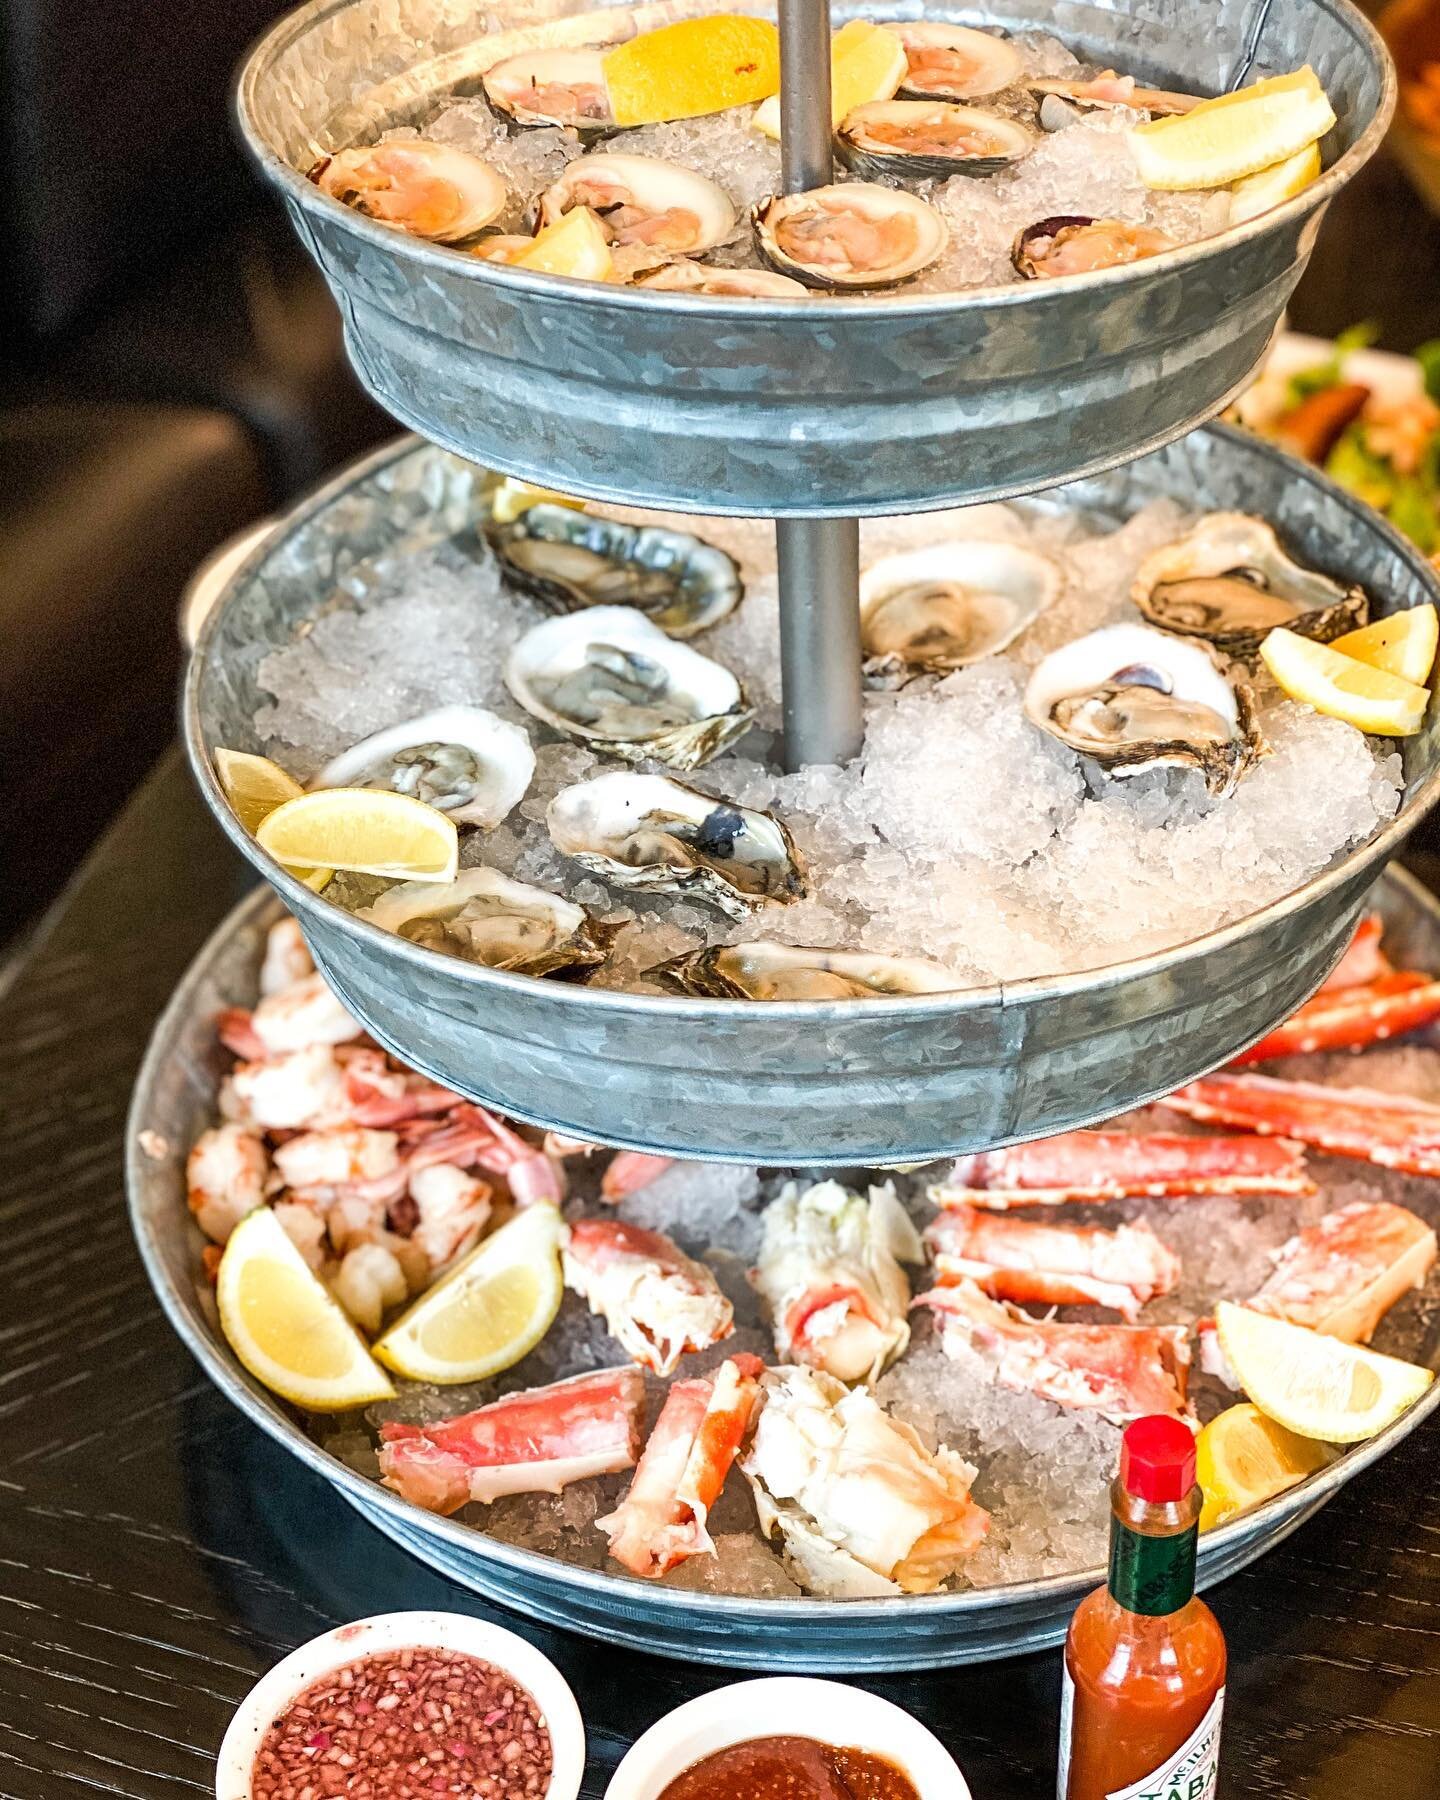 A #NYE seafood tower is just the energy we need going into 2022. Want more? Contact us for info on our hors d&rsquo;oeuvres kits dropped to your door! 

#privatechef #cheflife #foodie #chef #food #catering #personalchef #instafood #chefsofinstagram #